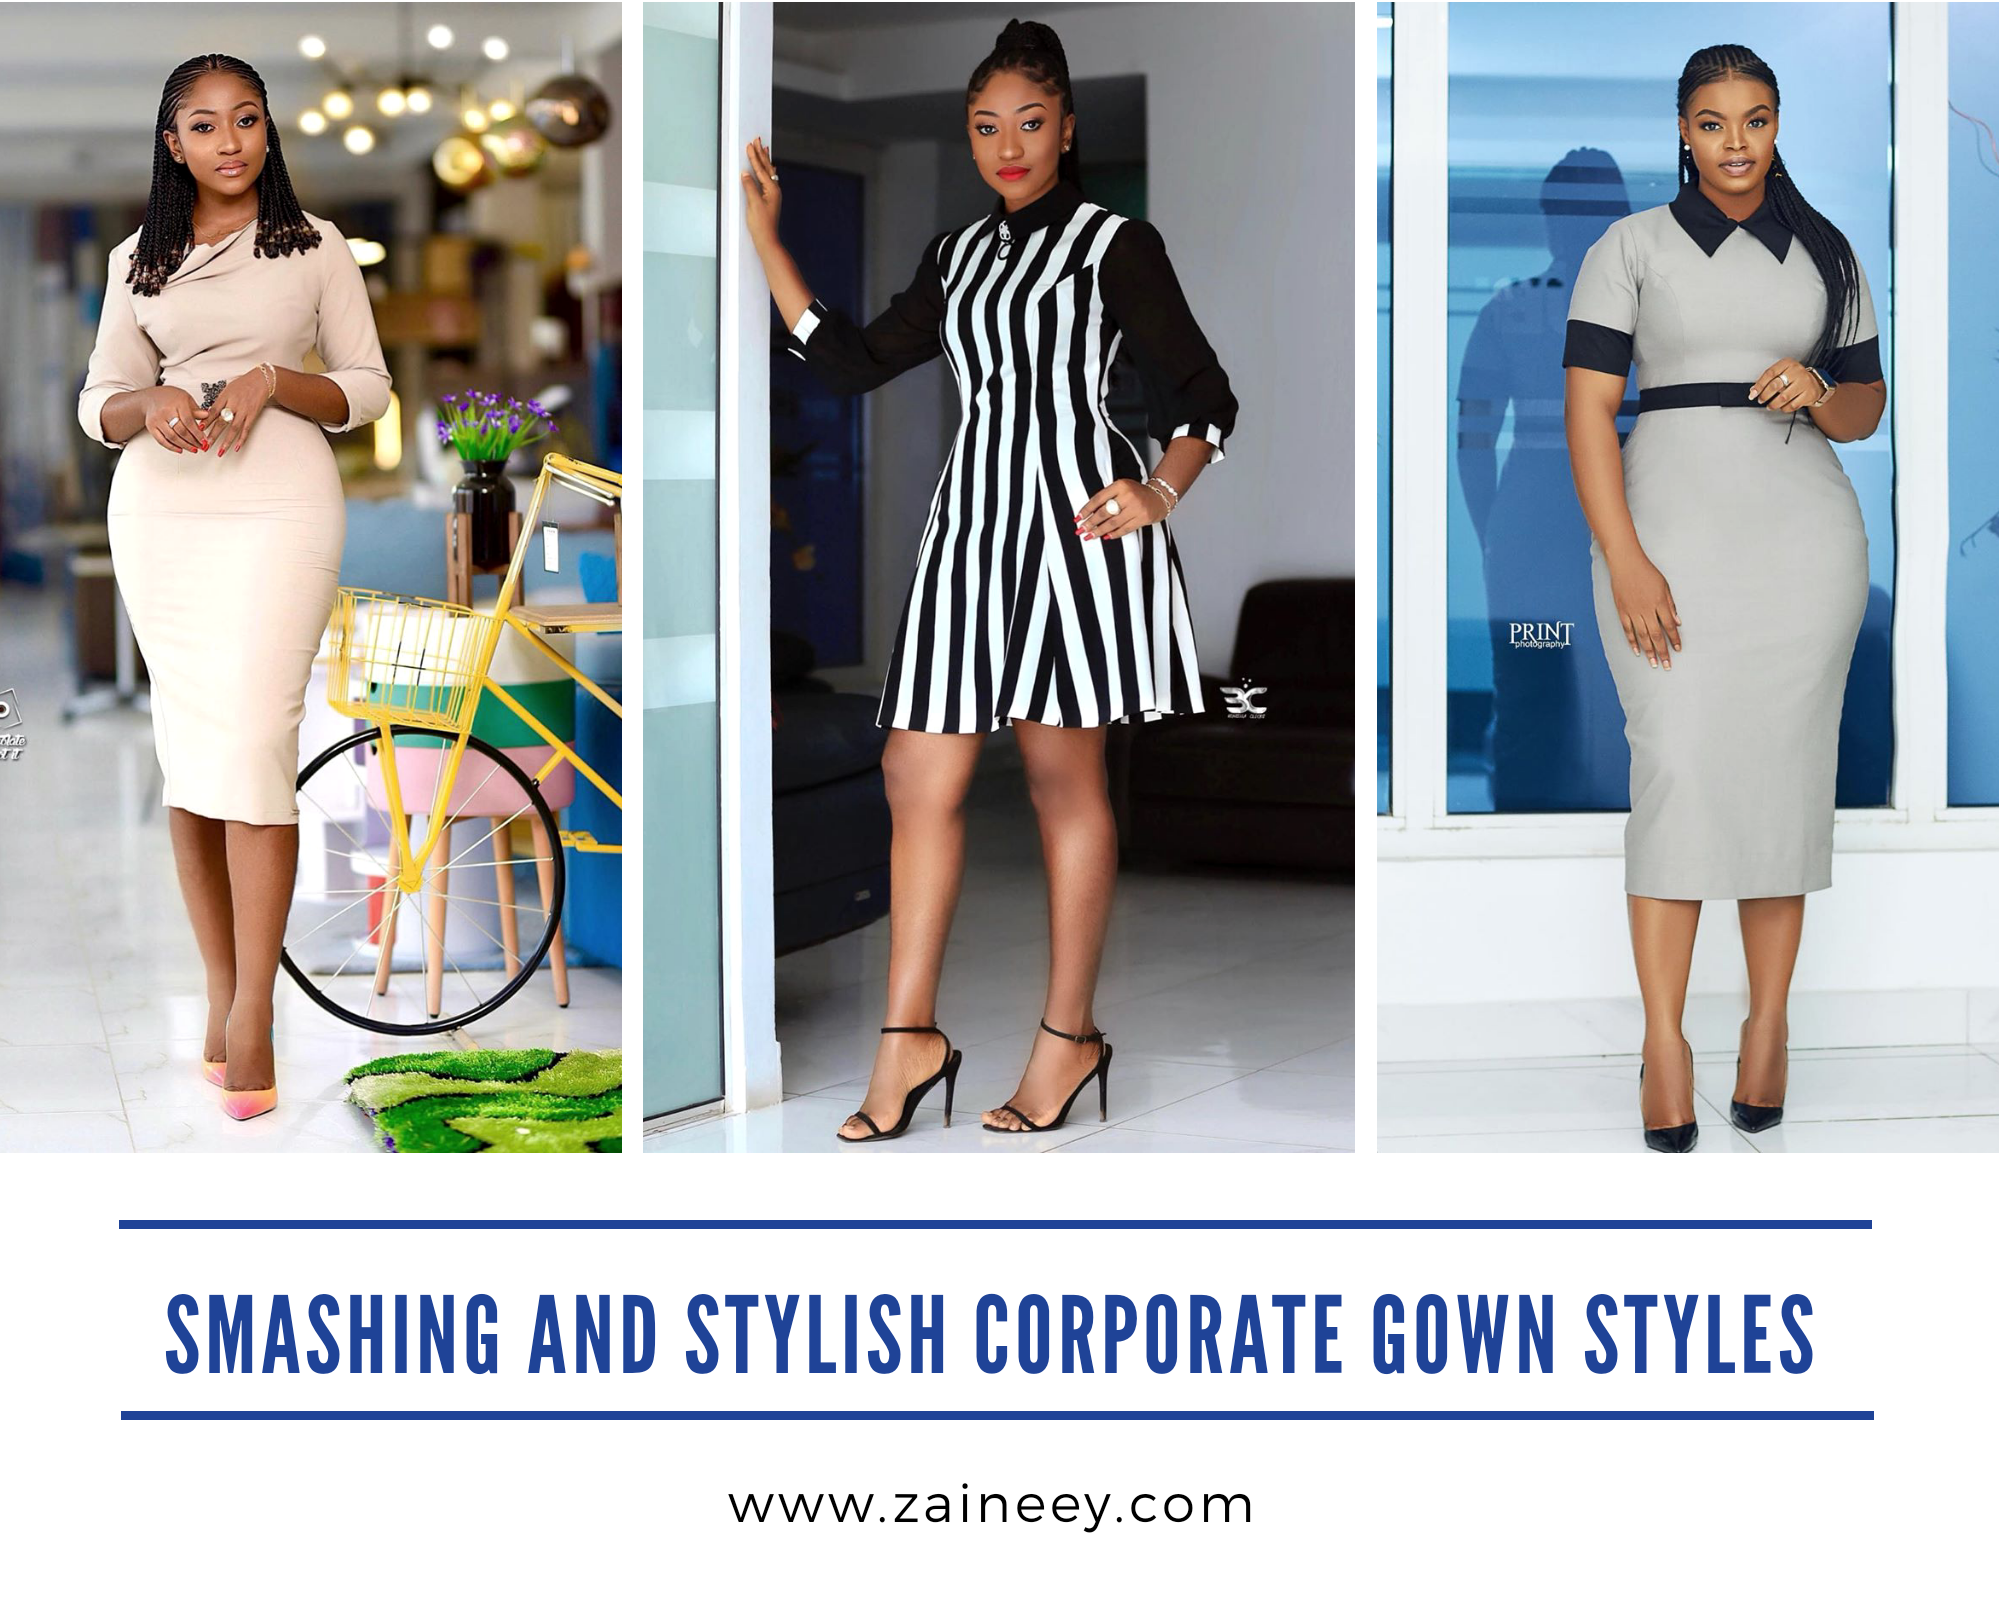 Corporate Gown Styles: Latest And Unique Corporate Gown Styles For Ladies